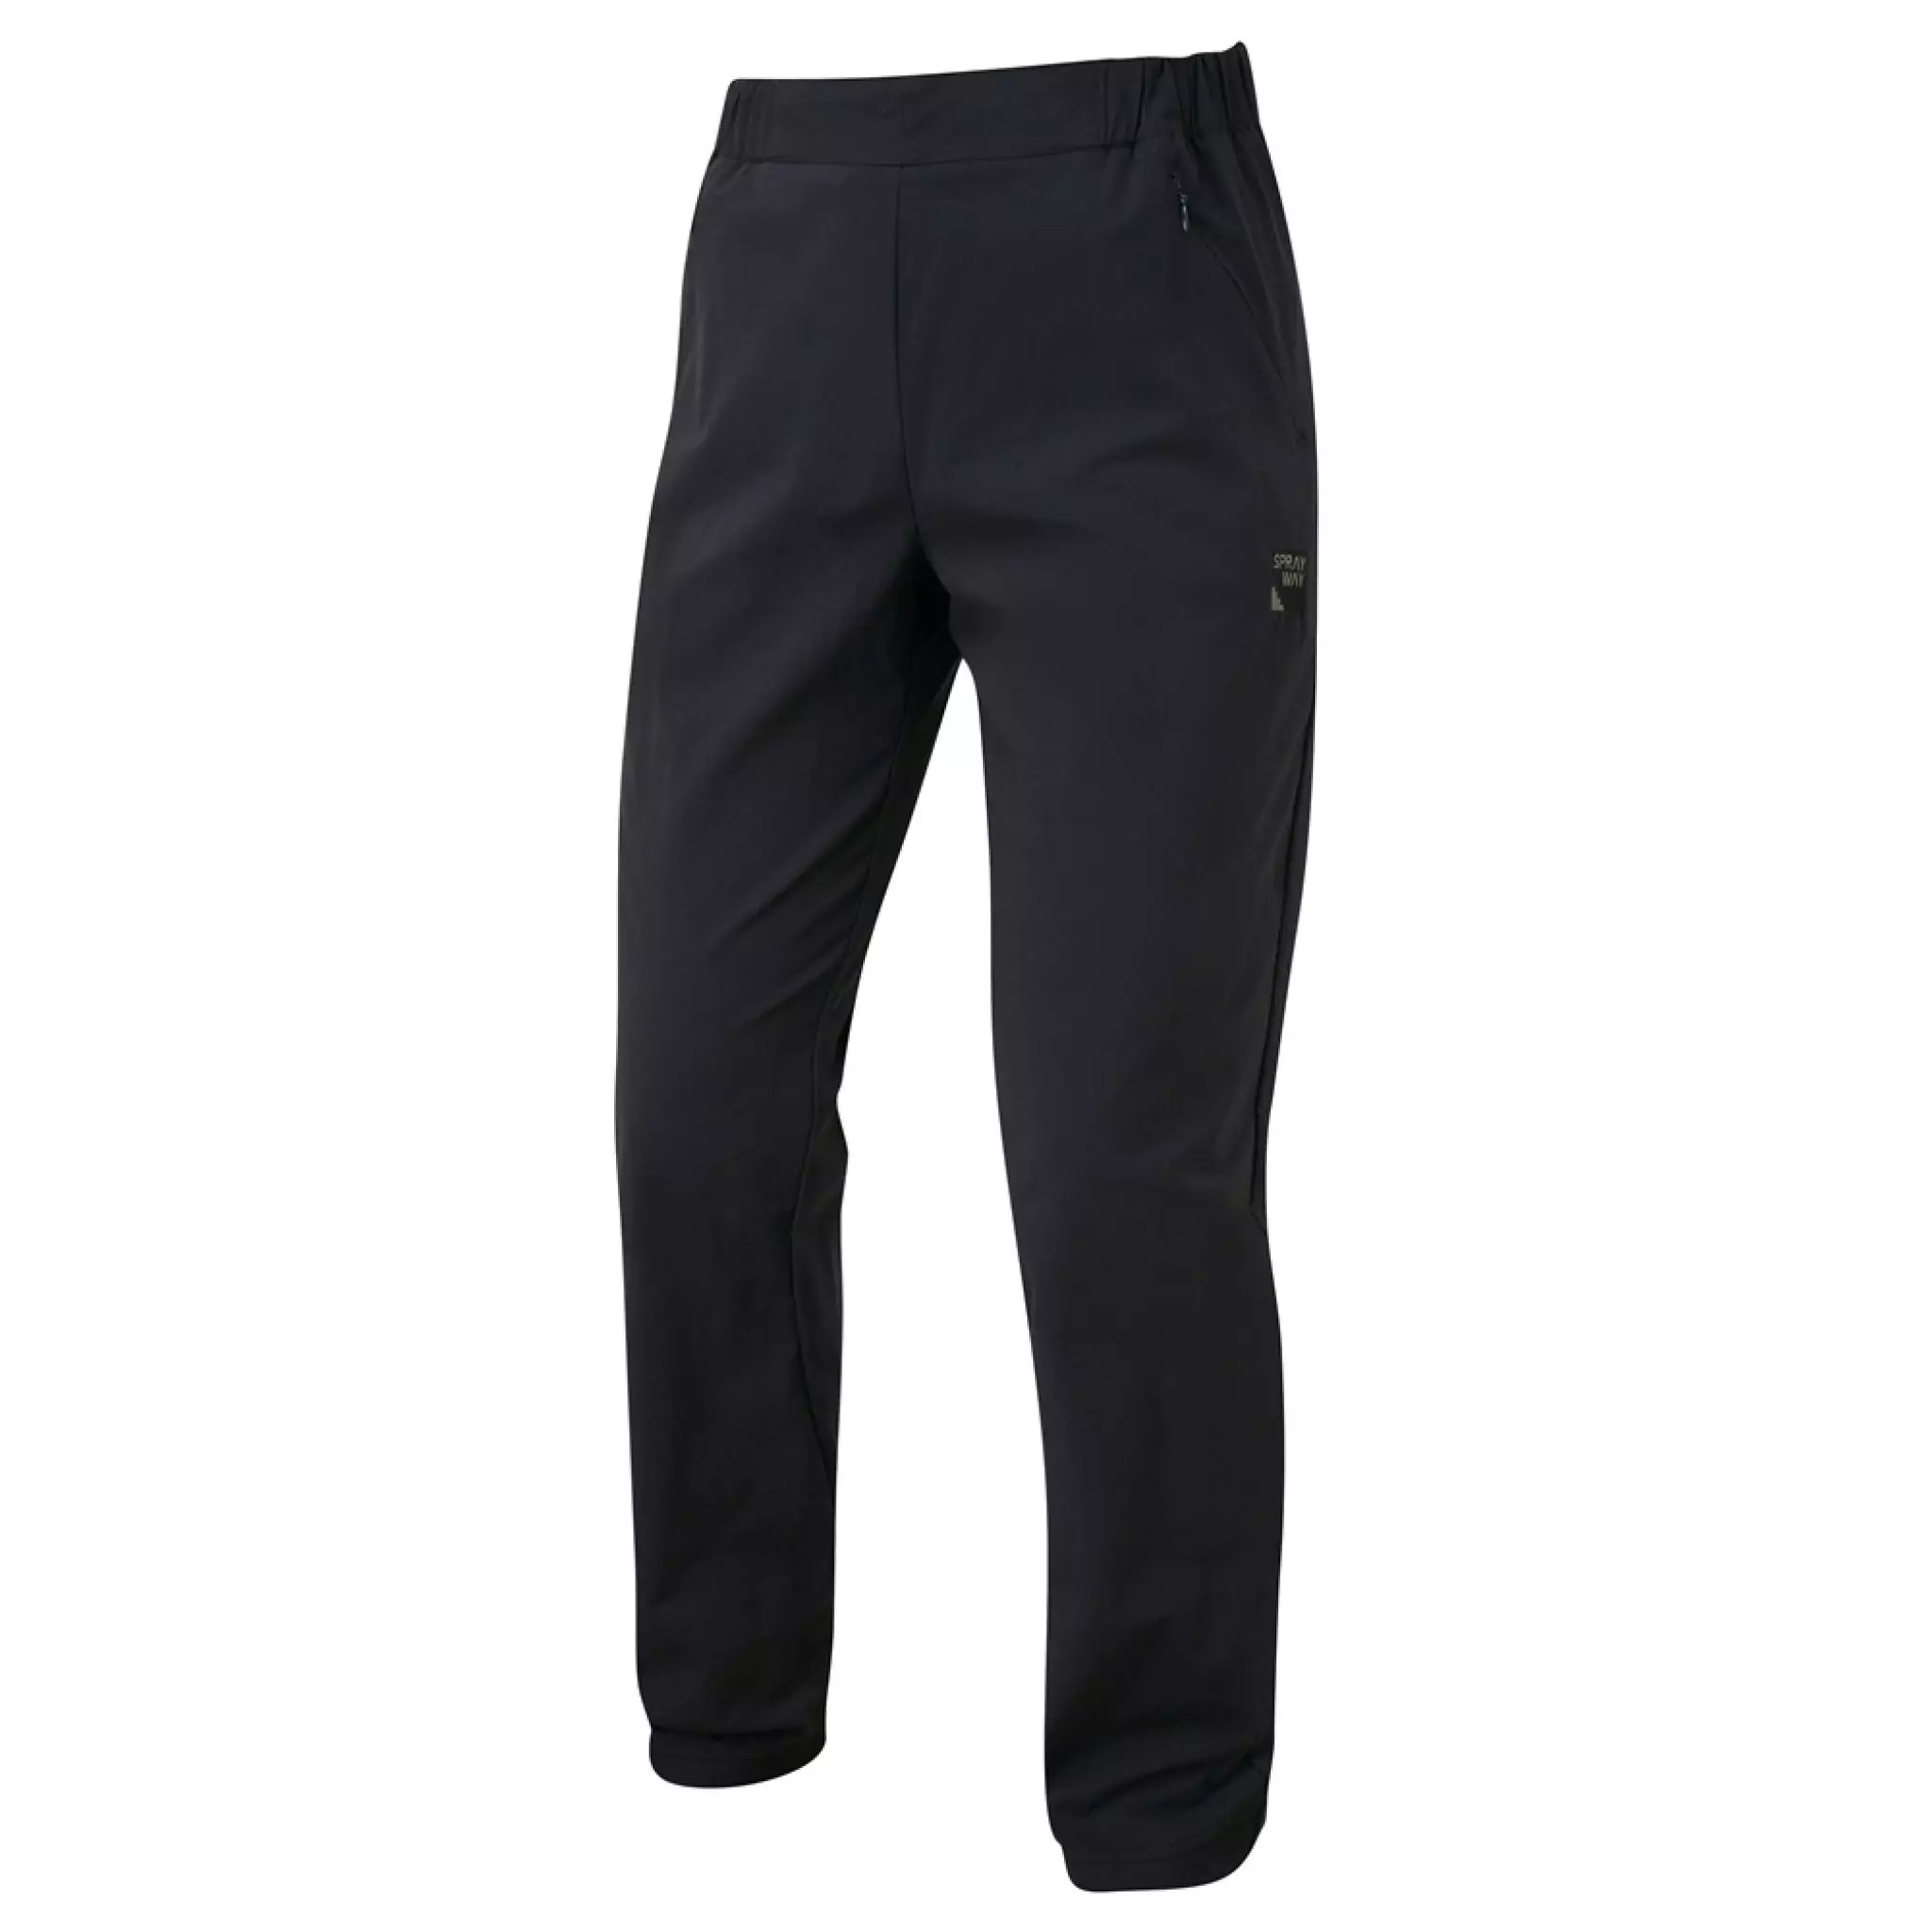 Details about   SPRAYWAY ESCAPE SLIM Pant Womens Lightweight Stretch Hiking Trousers Black LP£60 